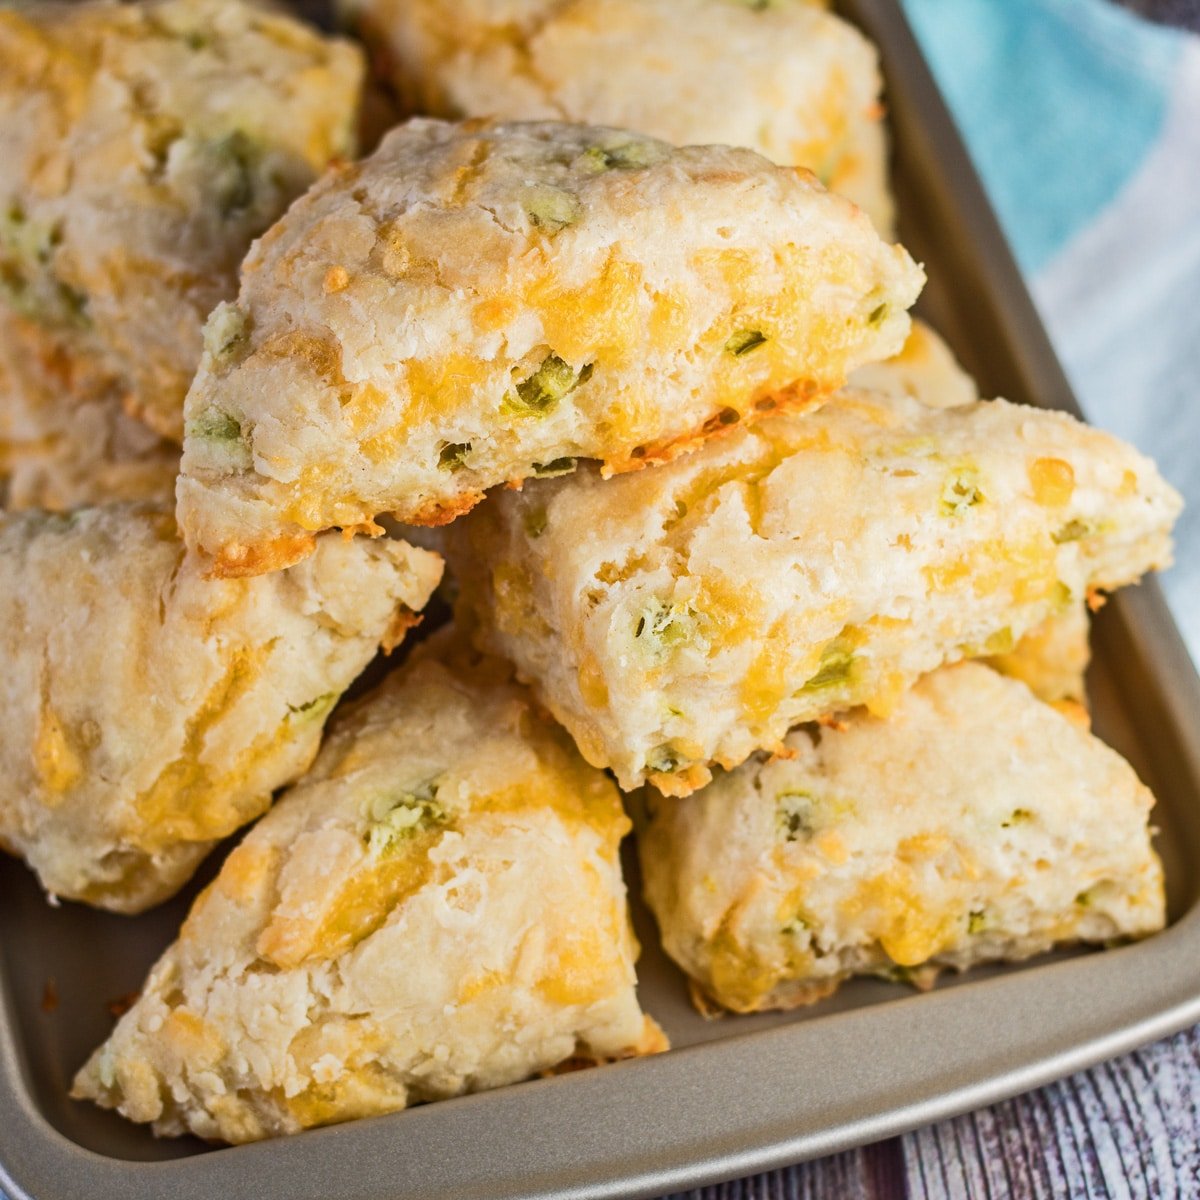 Jalapeno Cheddar Scones piled up on a baking tray with a blue and white background.